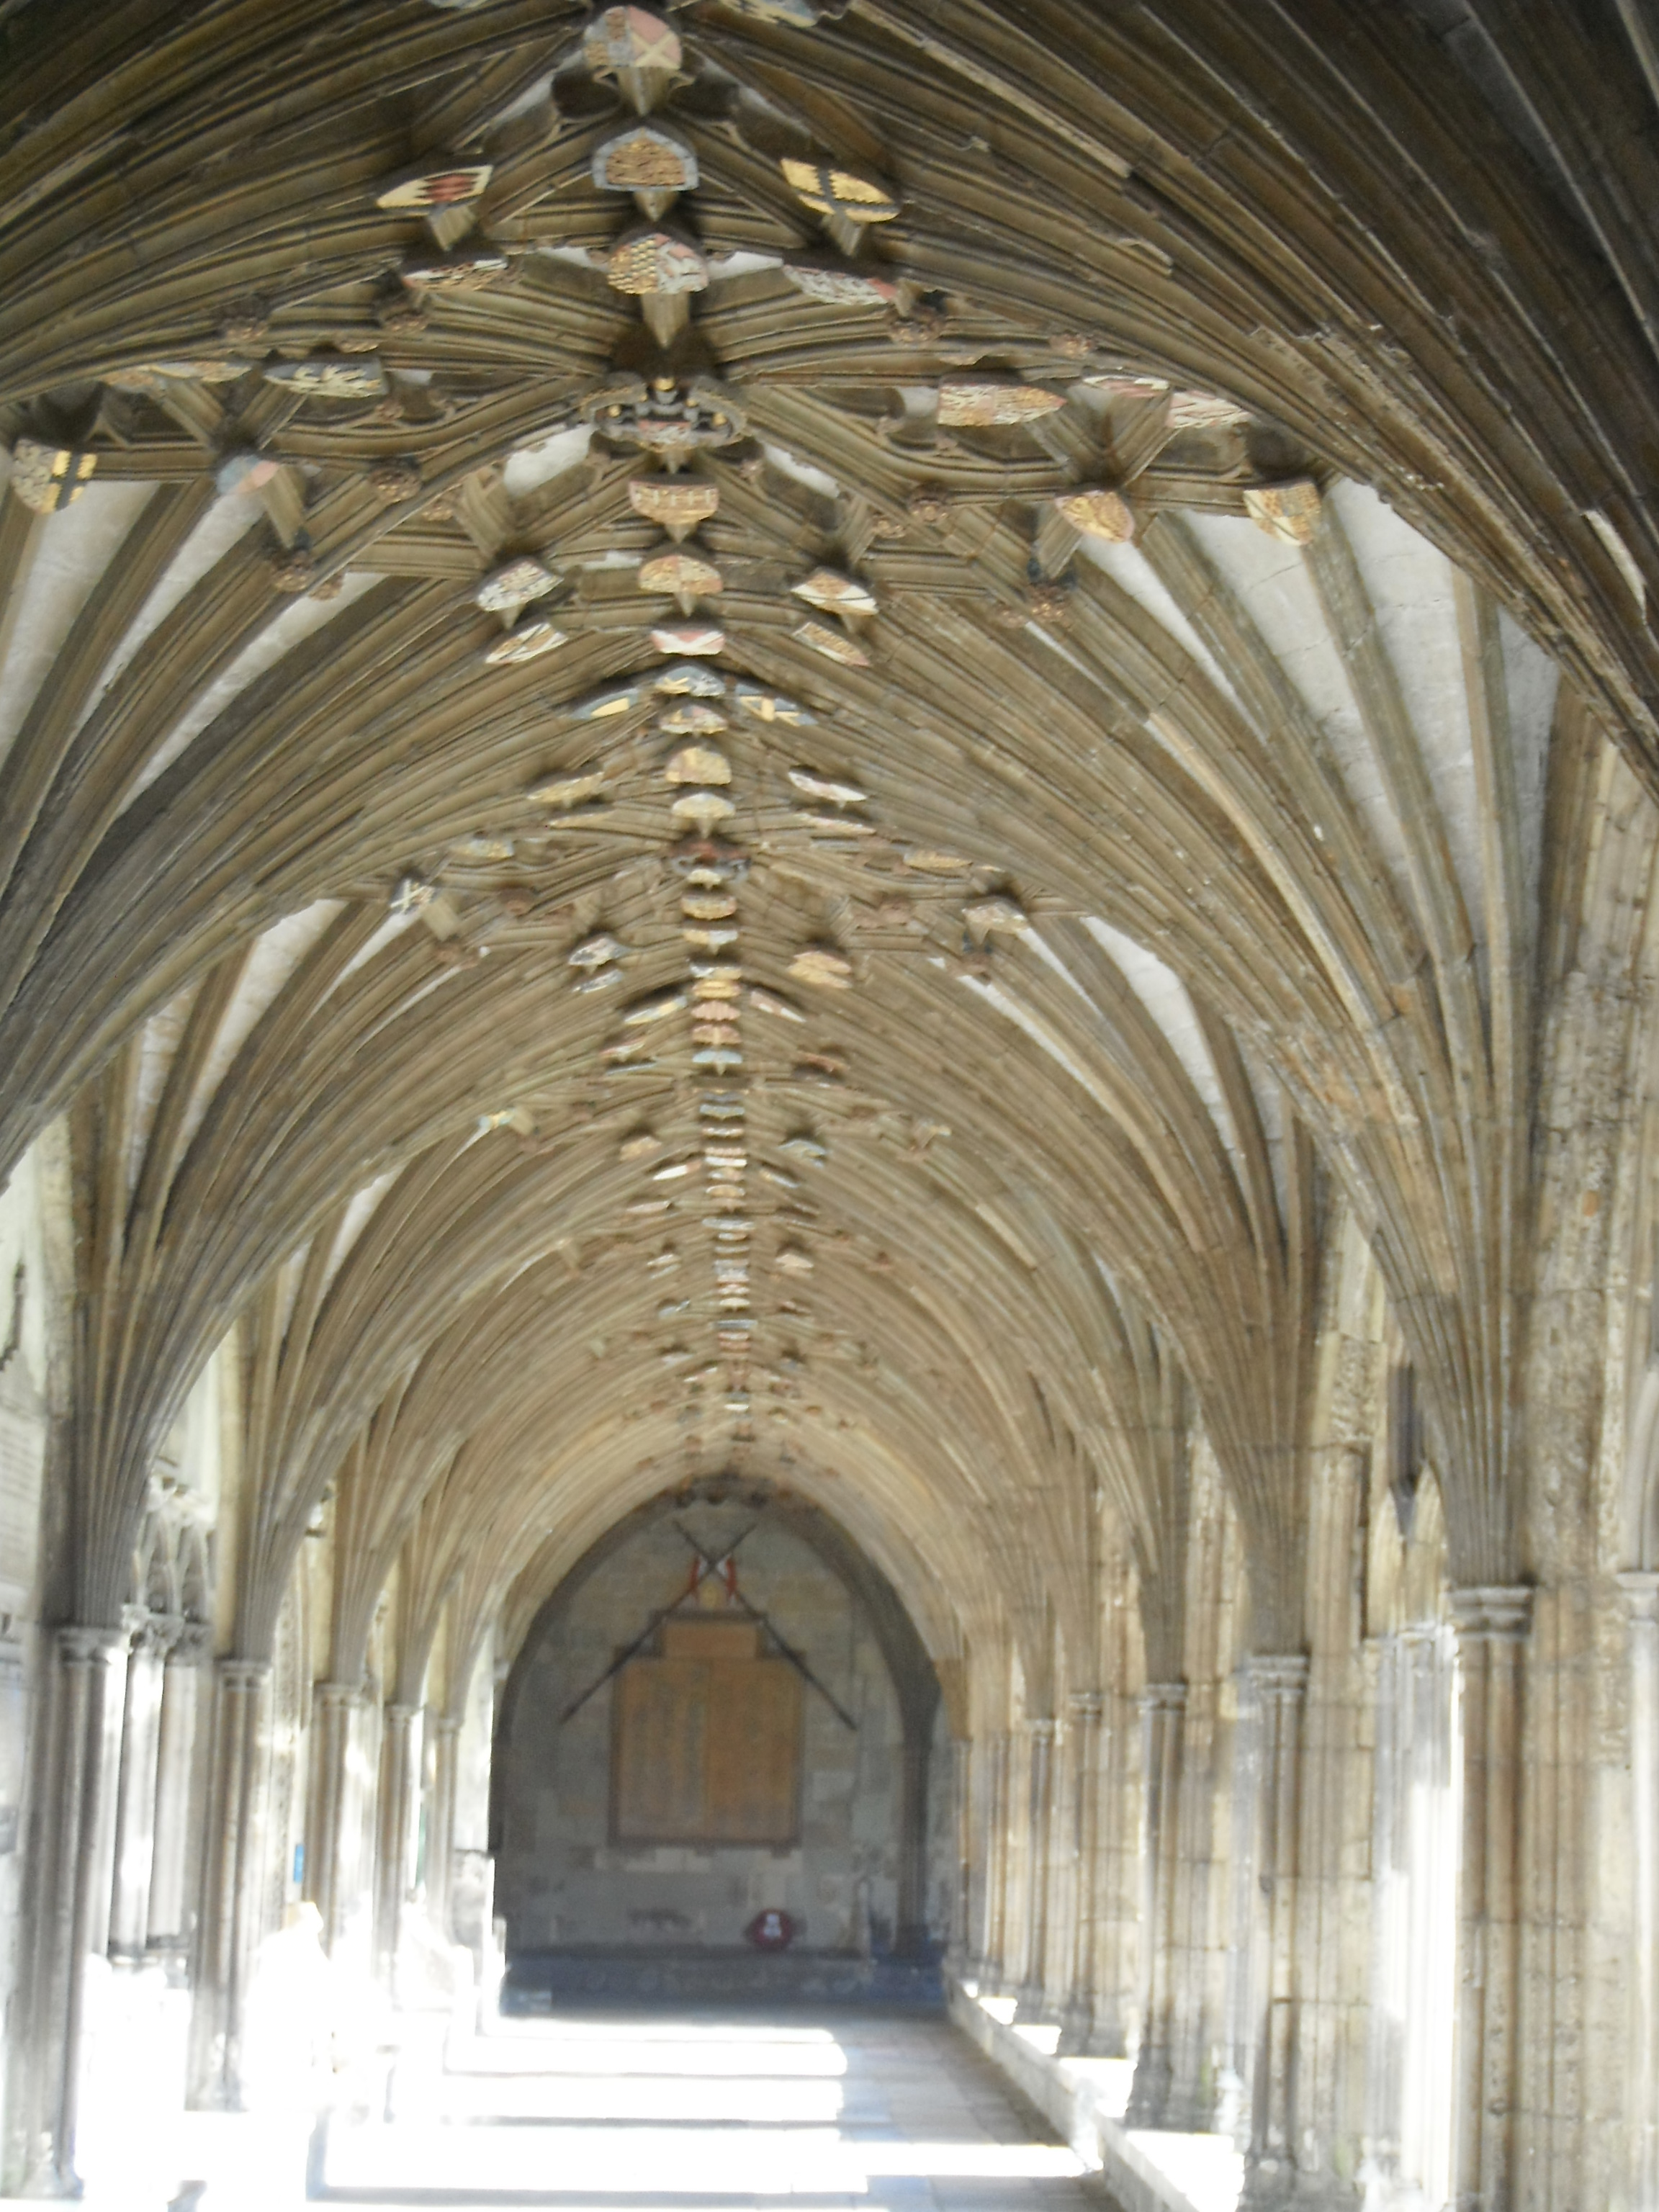  Photo taken by me - Canterbury Cathedral 